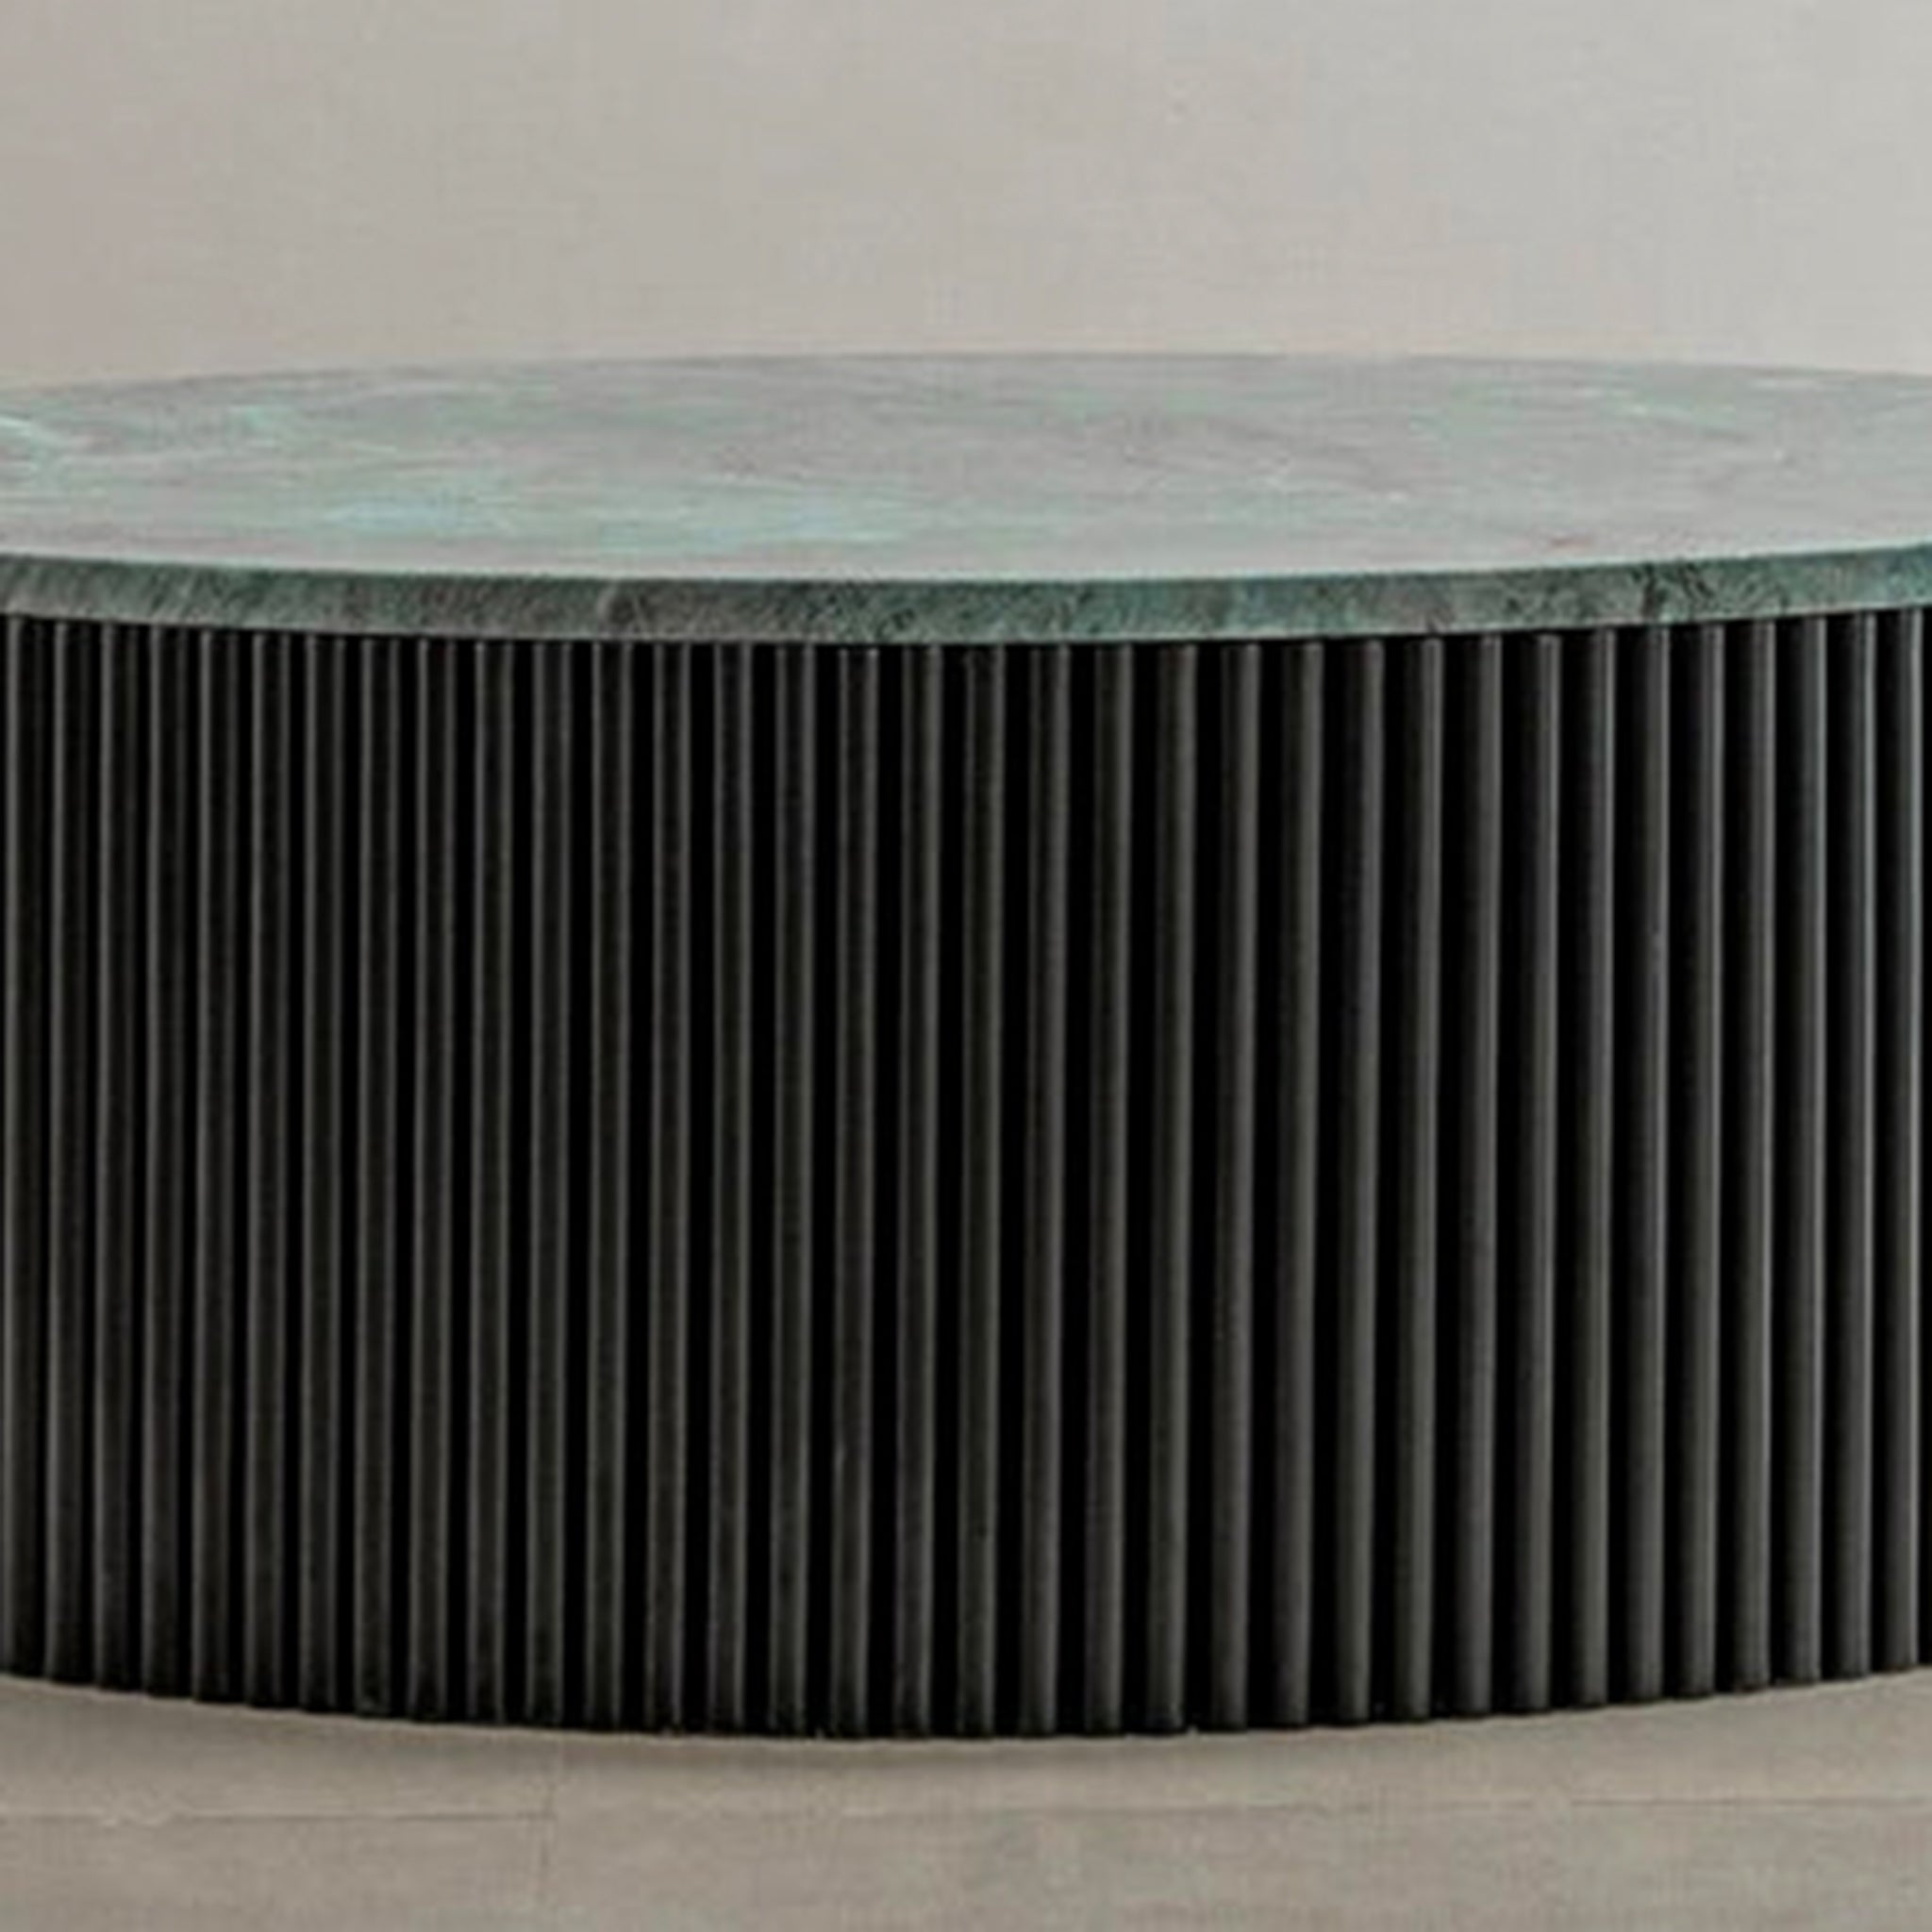 "Sleek coffee table with green stone top and ribbed base"